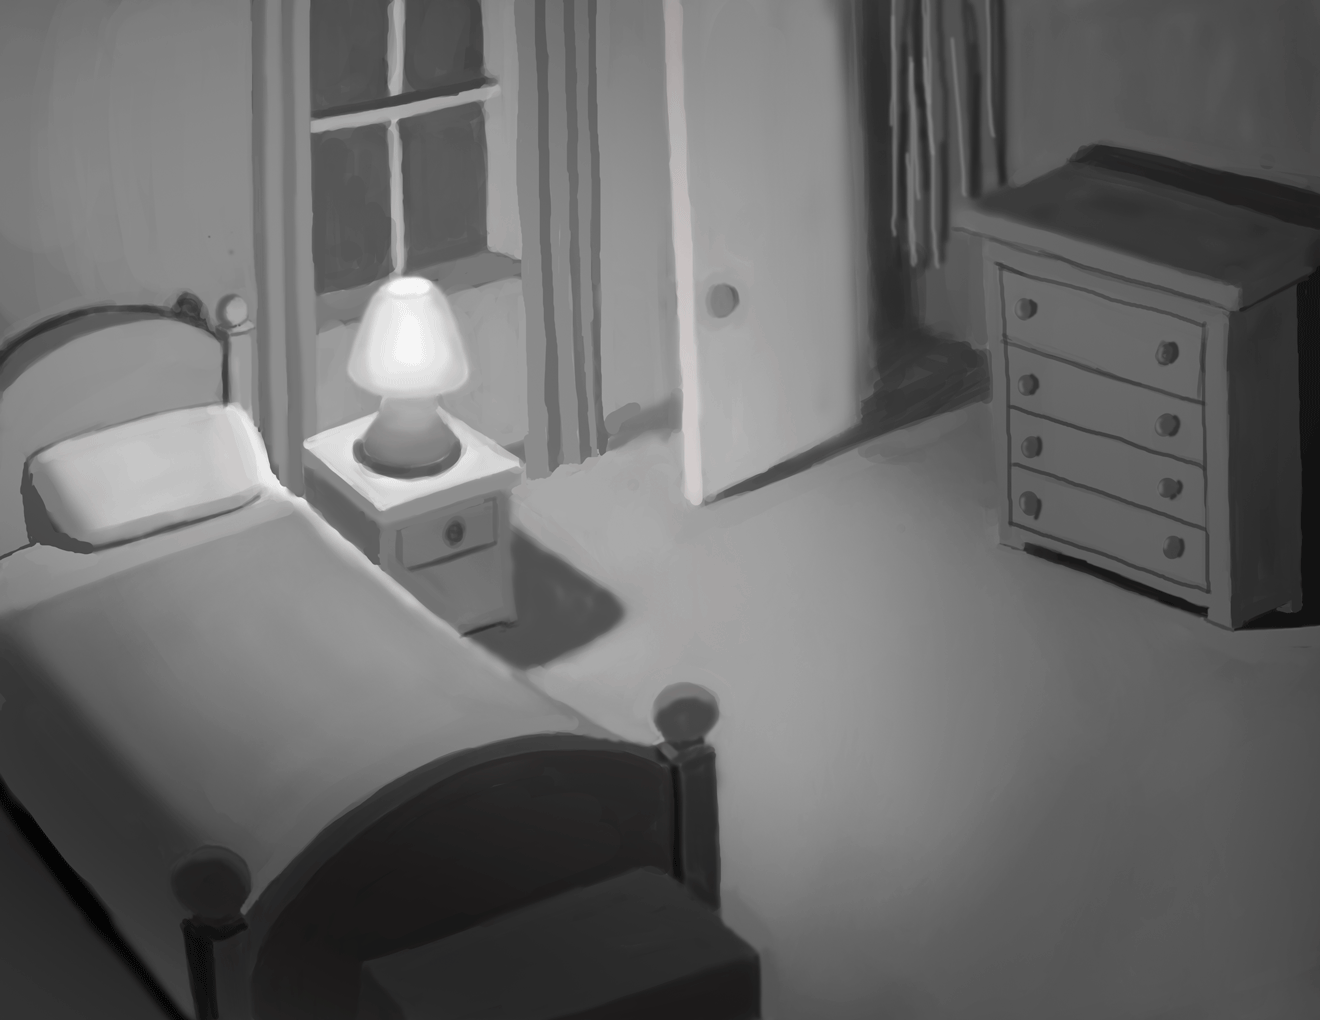 Practice_RoomLight-2pt2-lamp-nicka-sergio-suggestions-.png